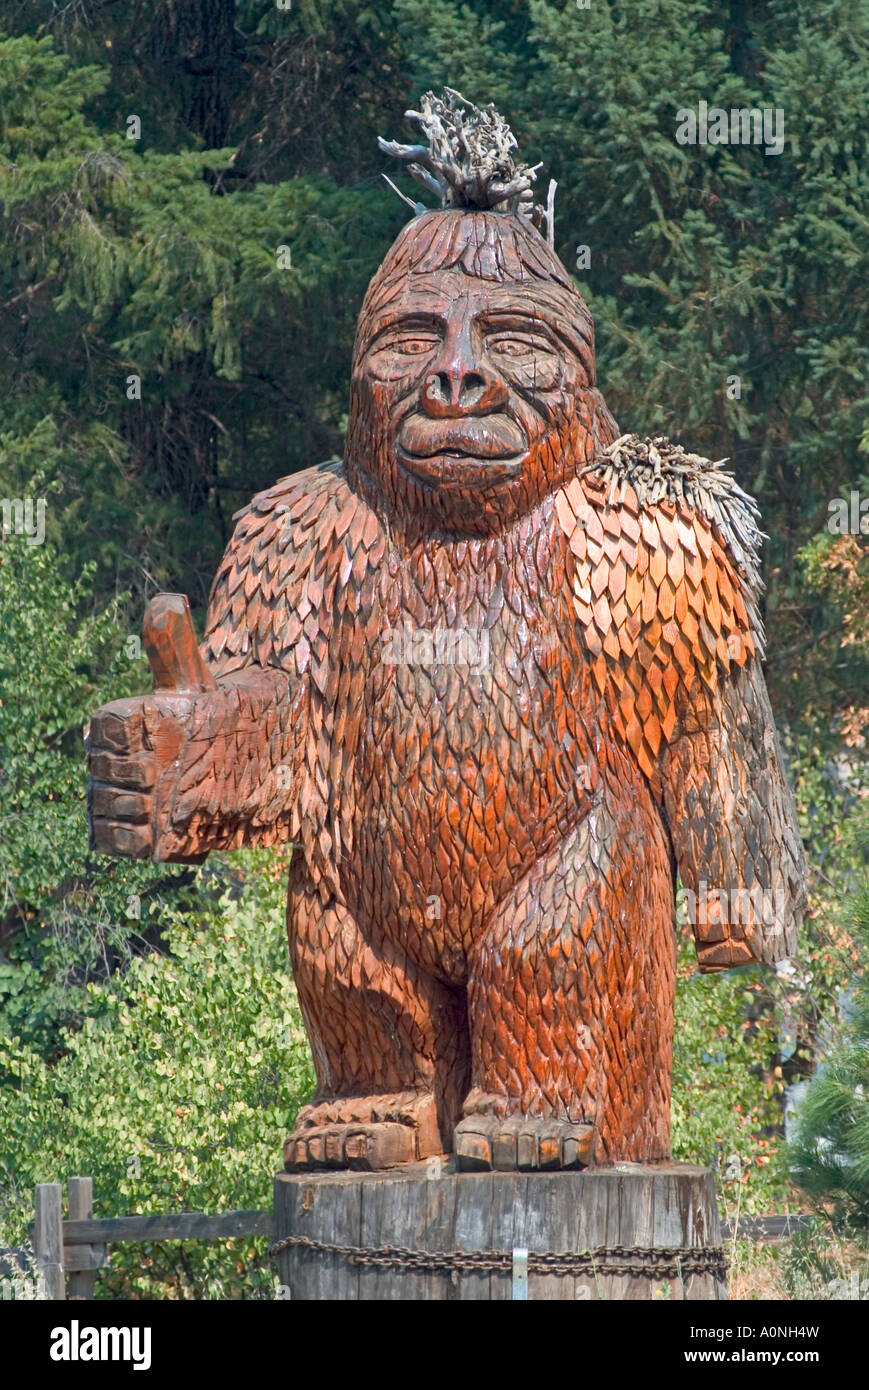 Carved wooden Big Foot statue in northern California Stock Photo